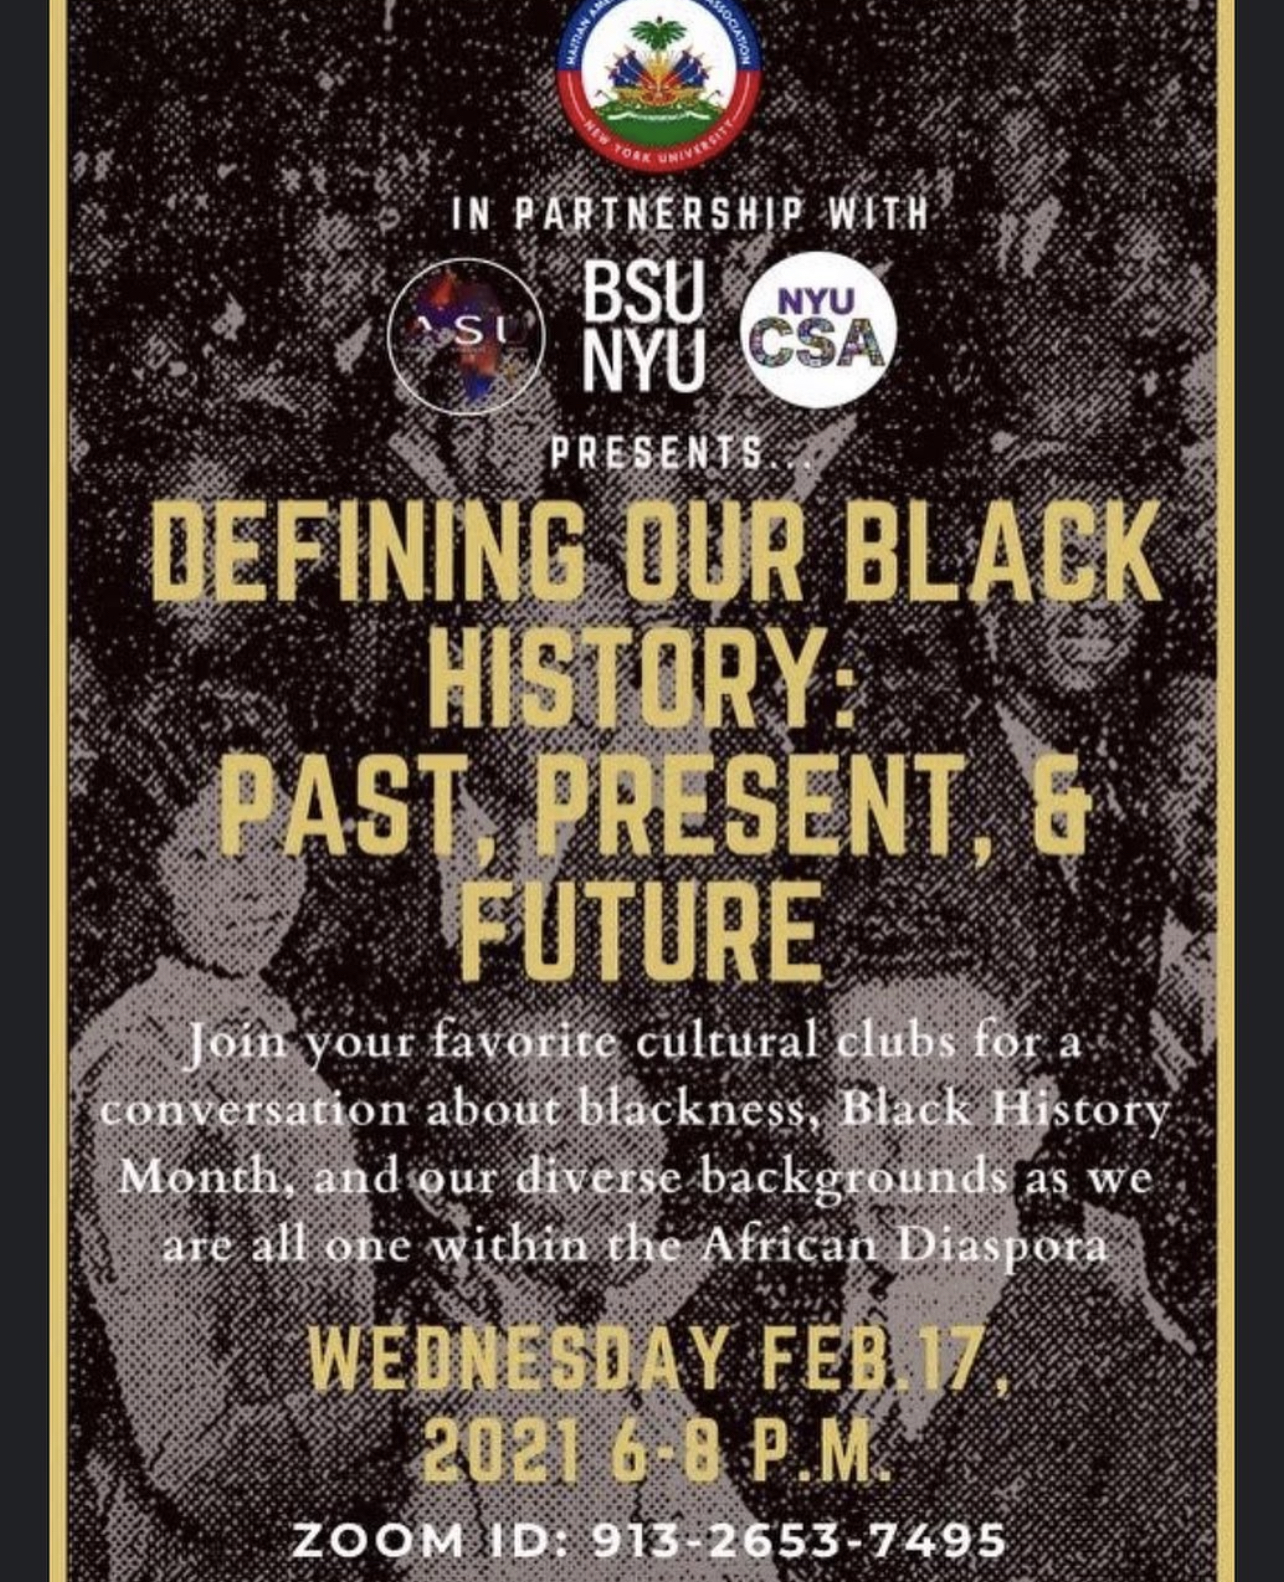 A marketing poster for the ASU Defining Our Black History: Past, Present, and Future event..